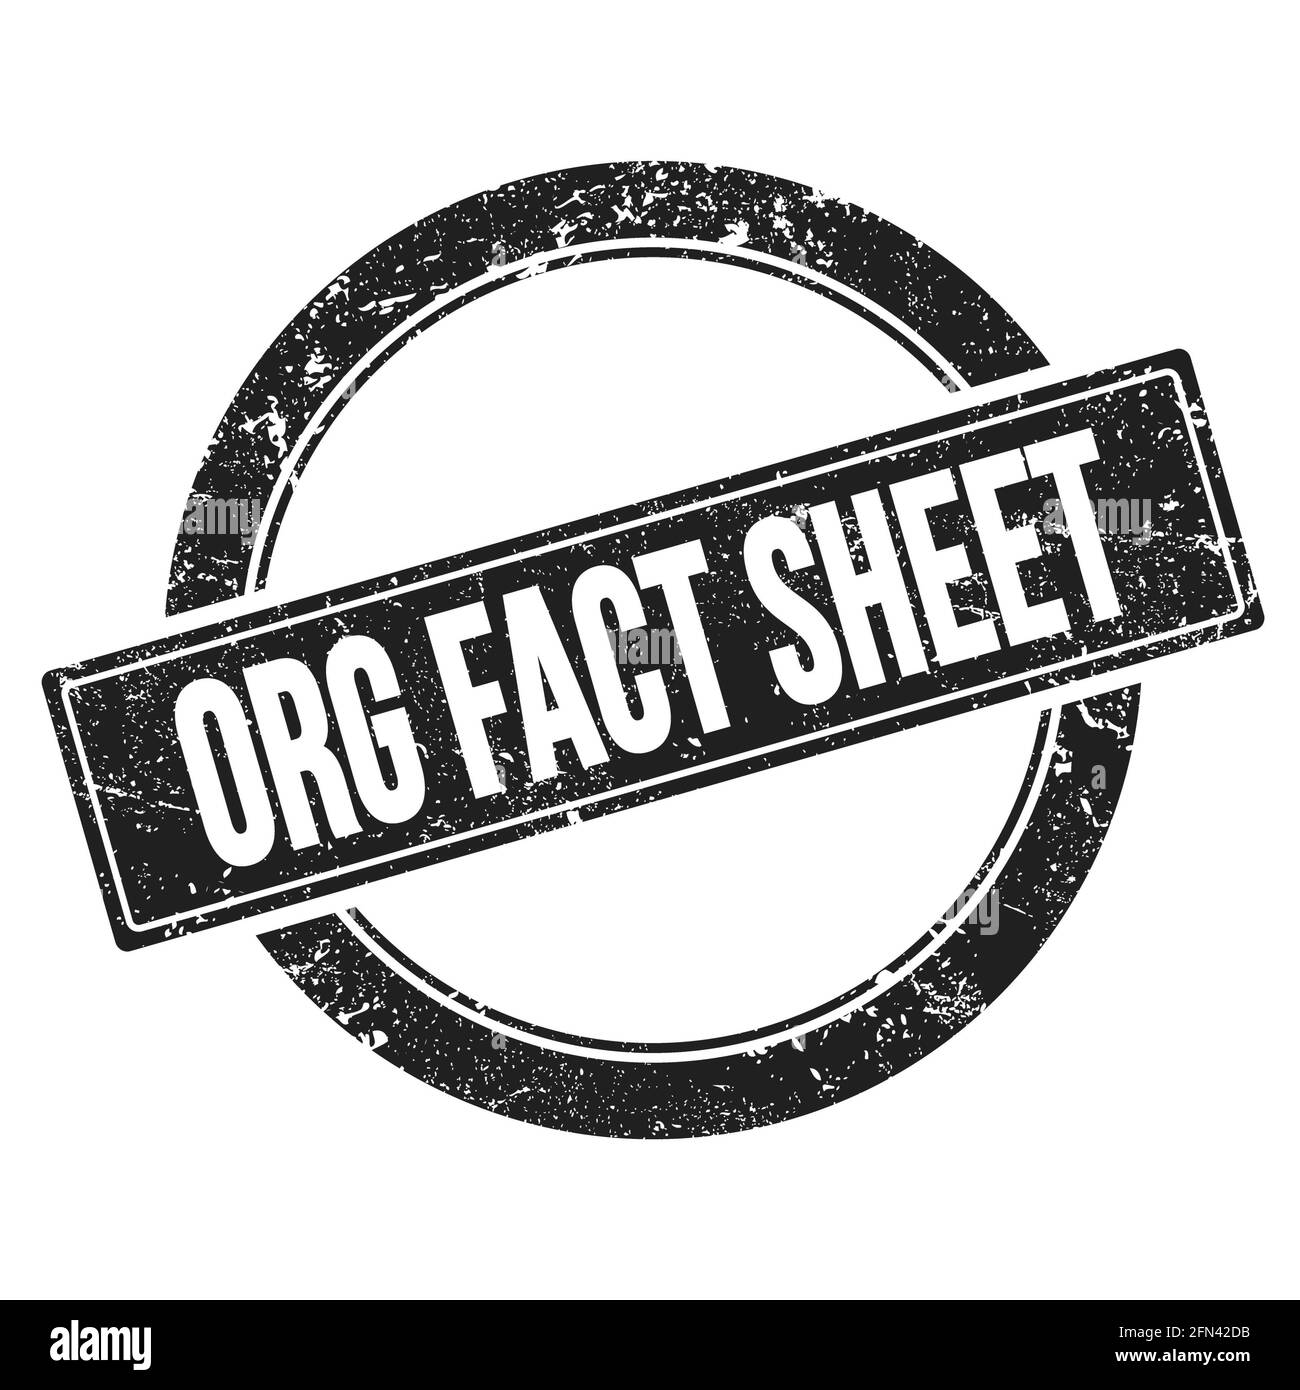 ORG FACT SHEET text on black grungy round vintage stamp. Stock Photo